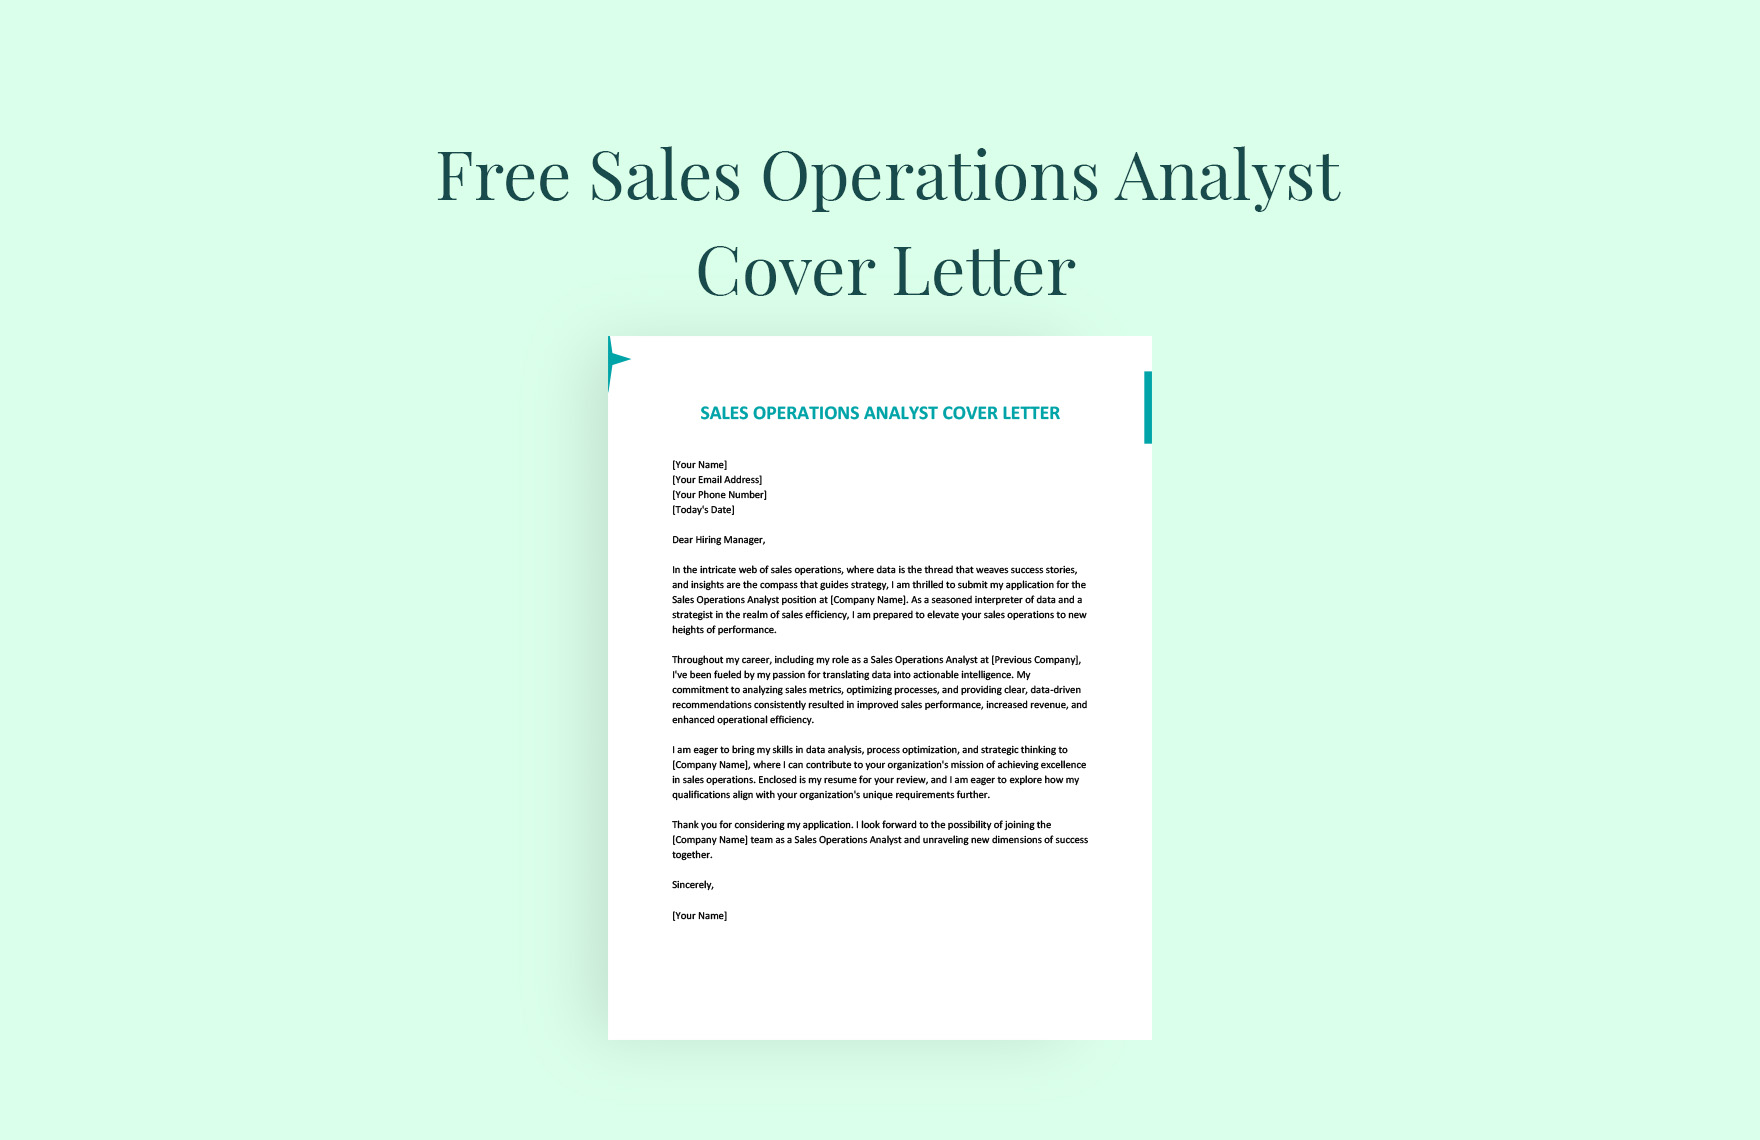 Sales Operations Analyst Cover Letter in Word, Google Docs